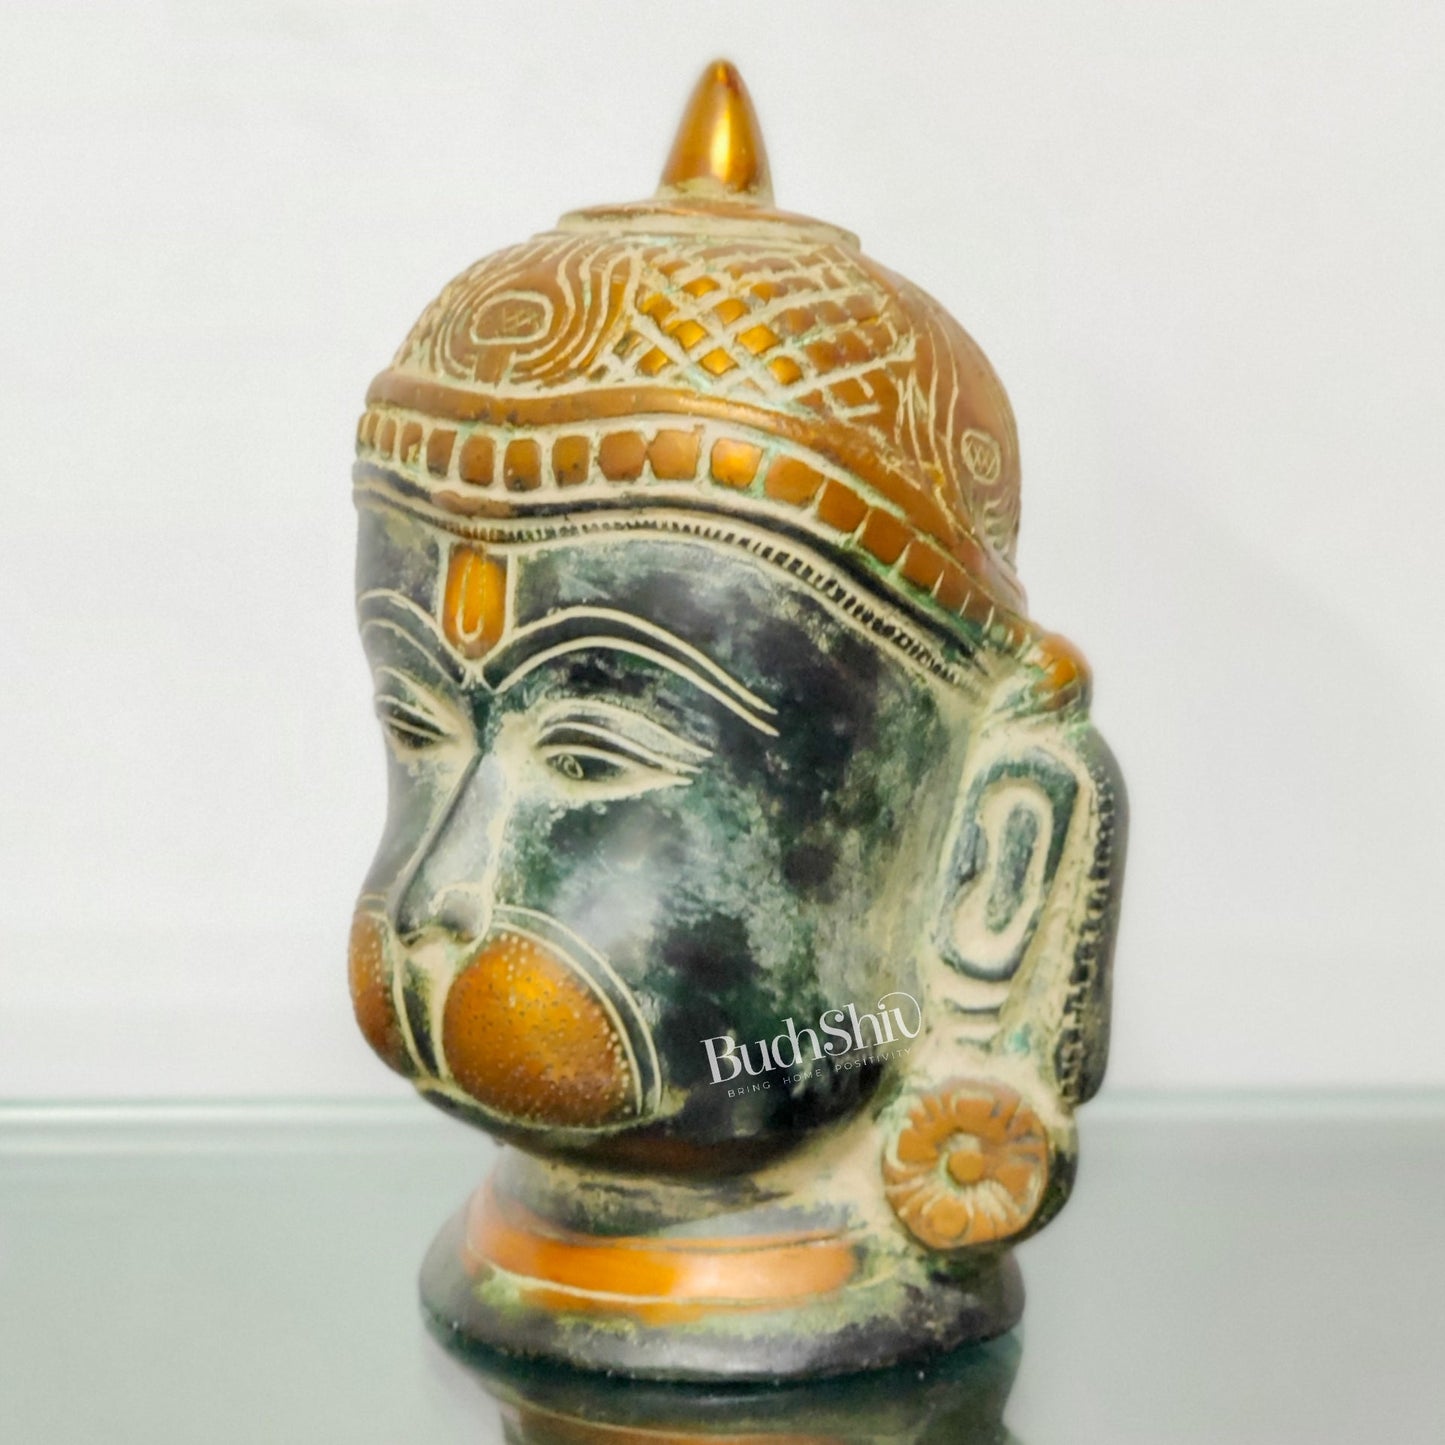 Intricately Handcrafted Brass Lord Hanuman Bust | 7.5" Height | Tabletop Decor - Budhshiv.com